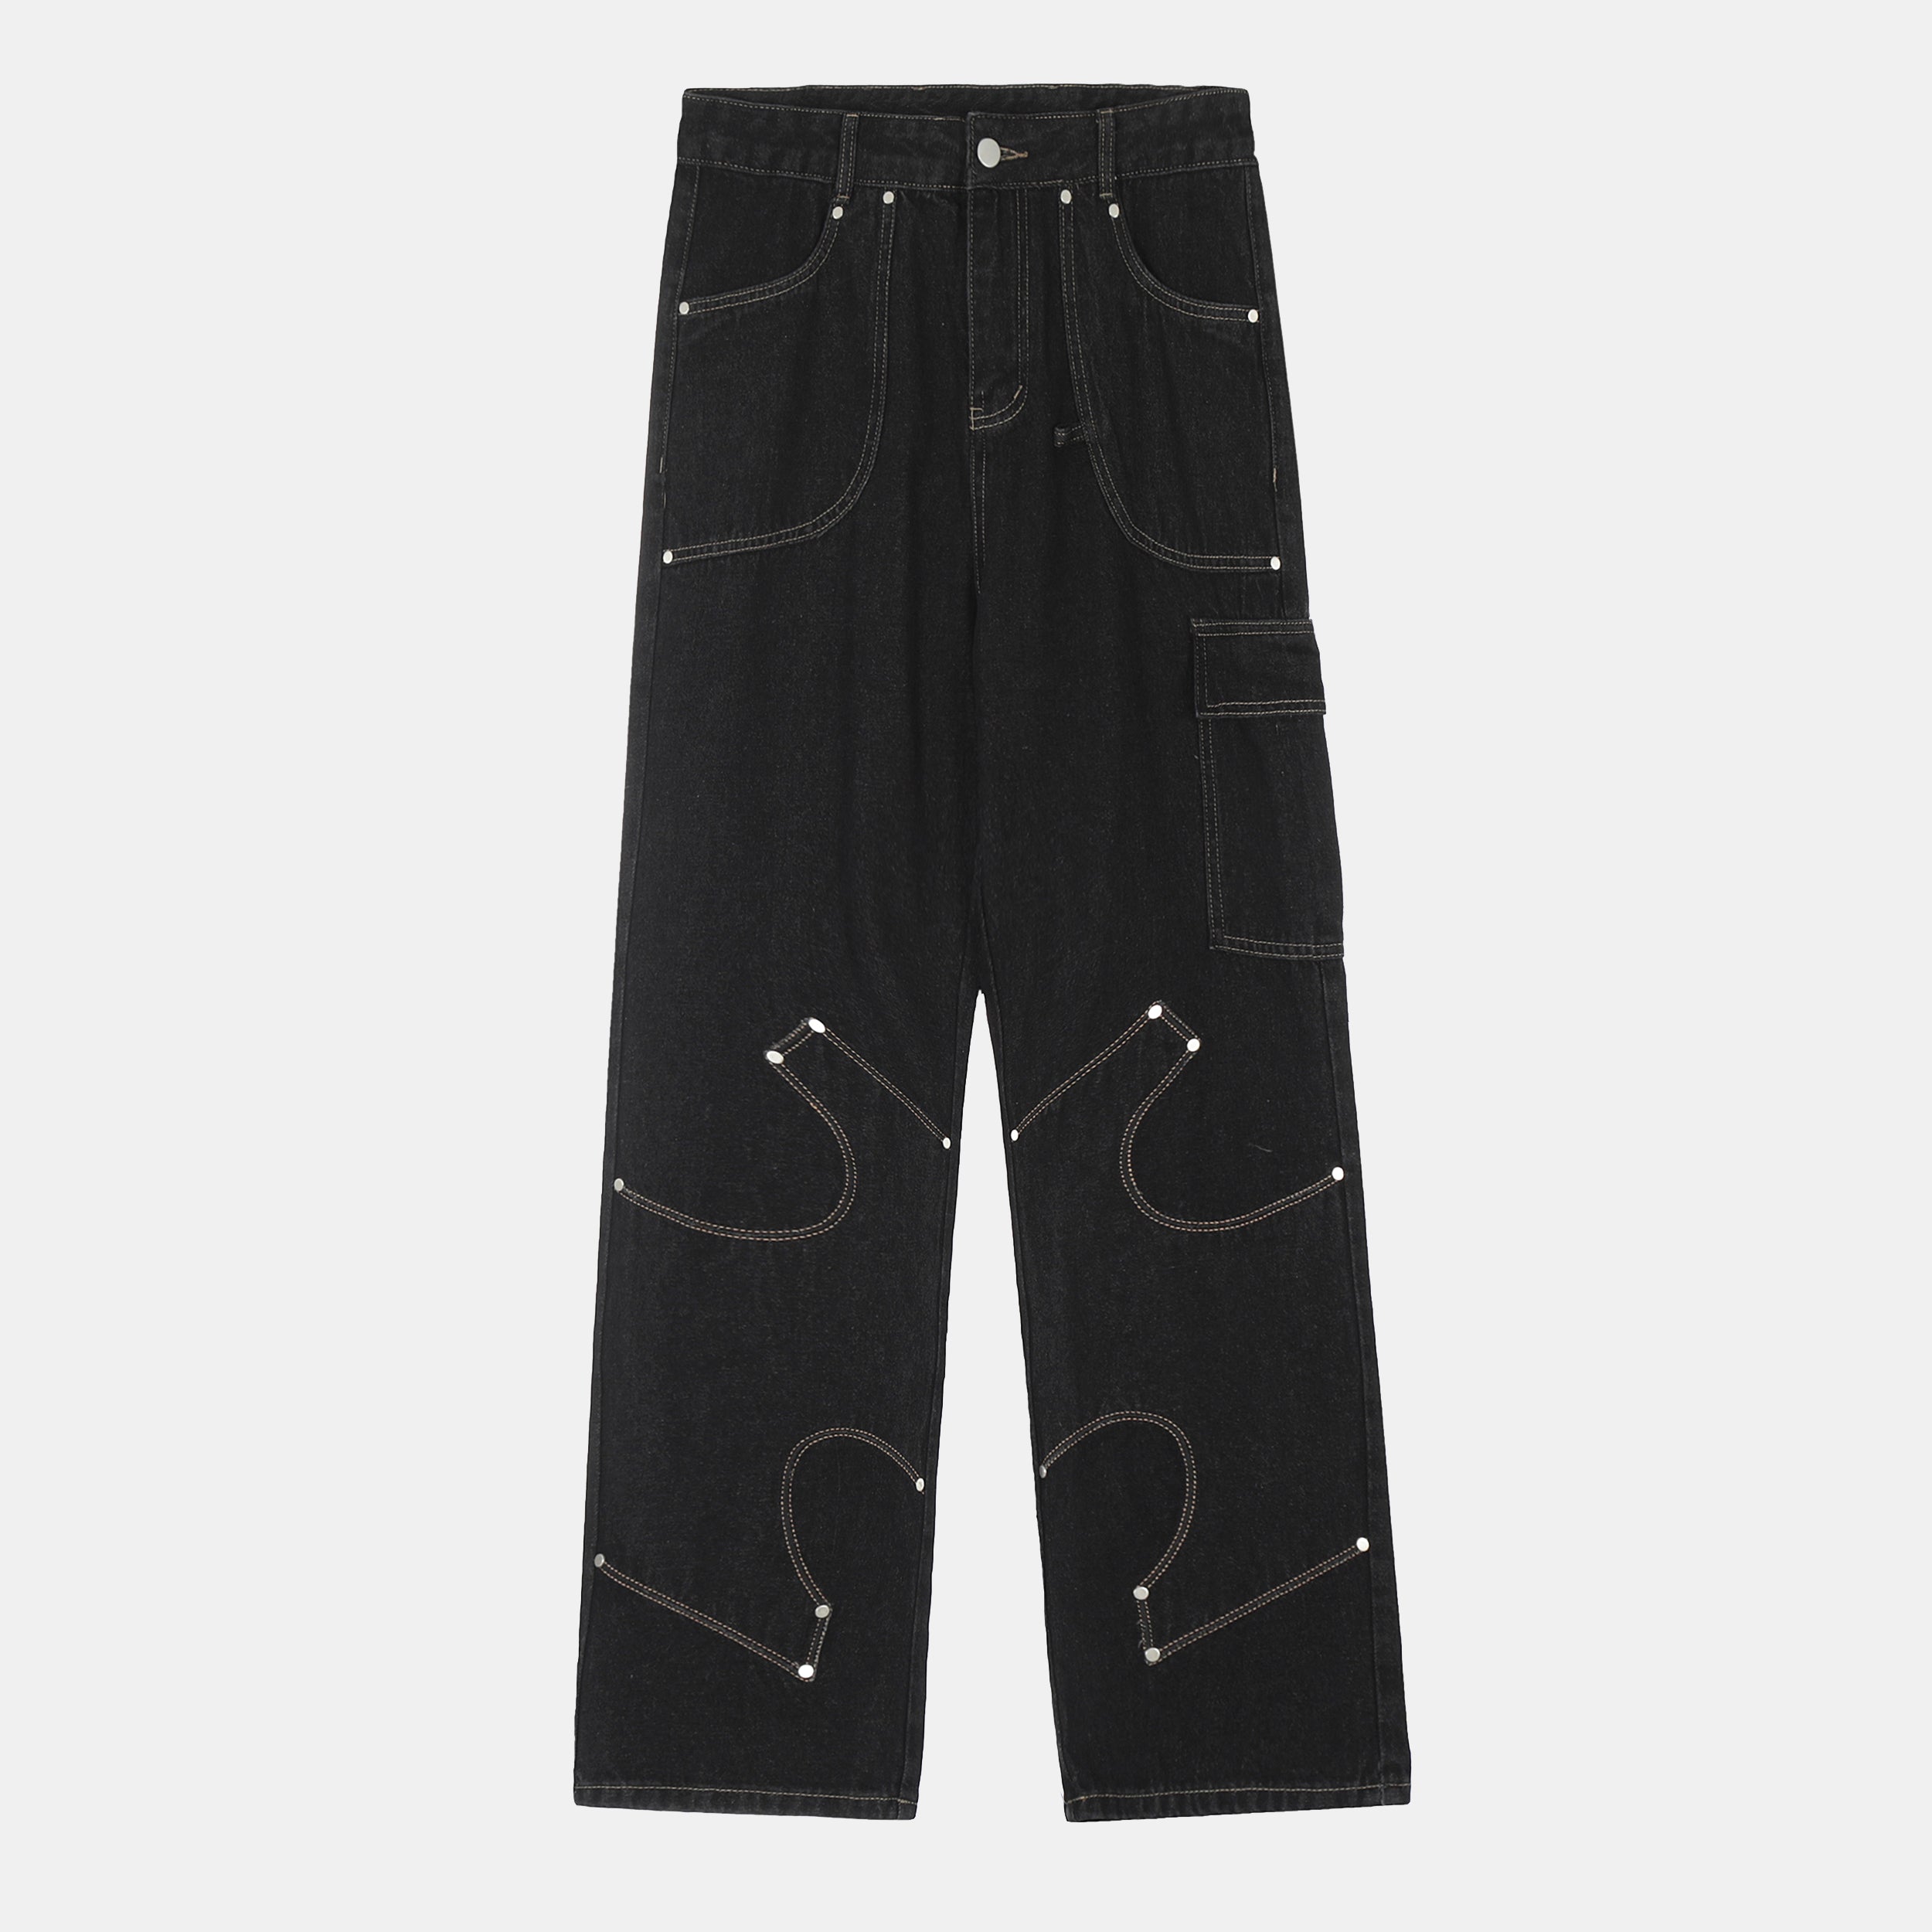 "Galaxy Rider" Embellished Jeans - Santo 